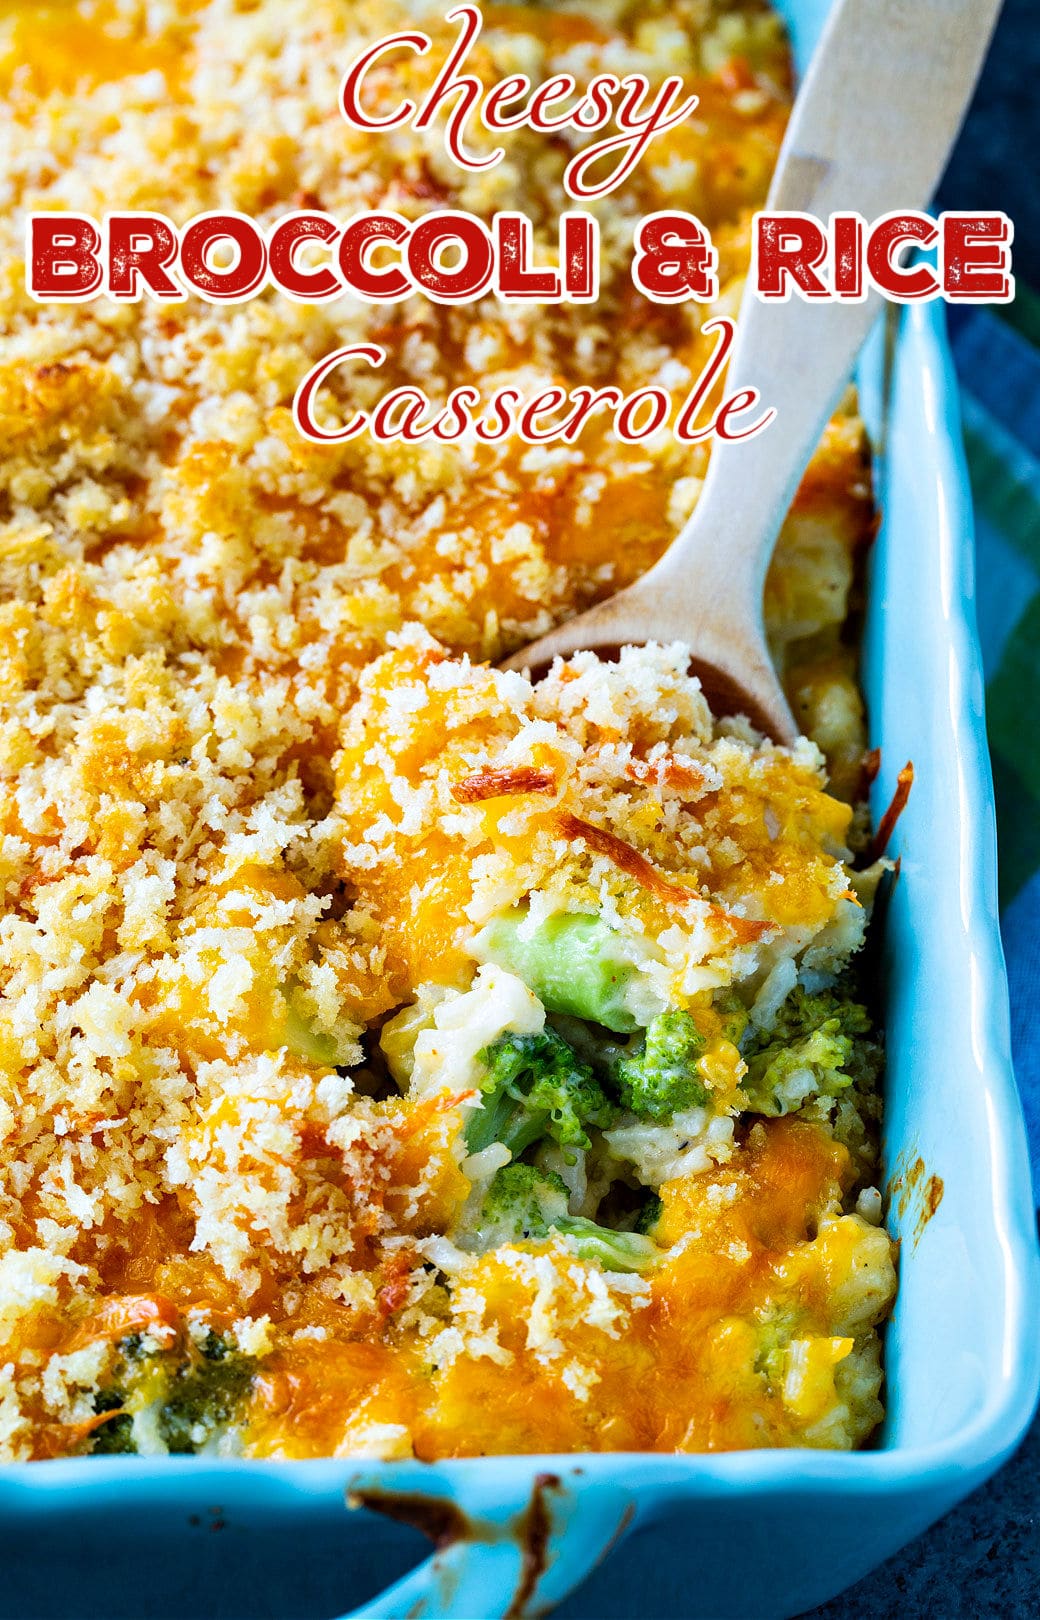  Broccoli and Rice Casserole in a baking dish.